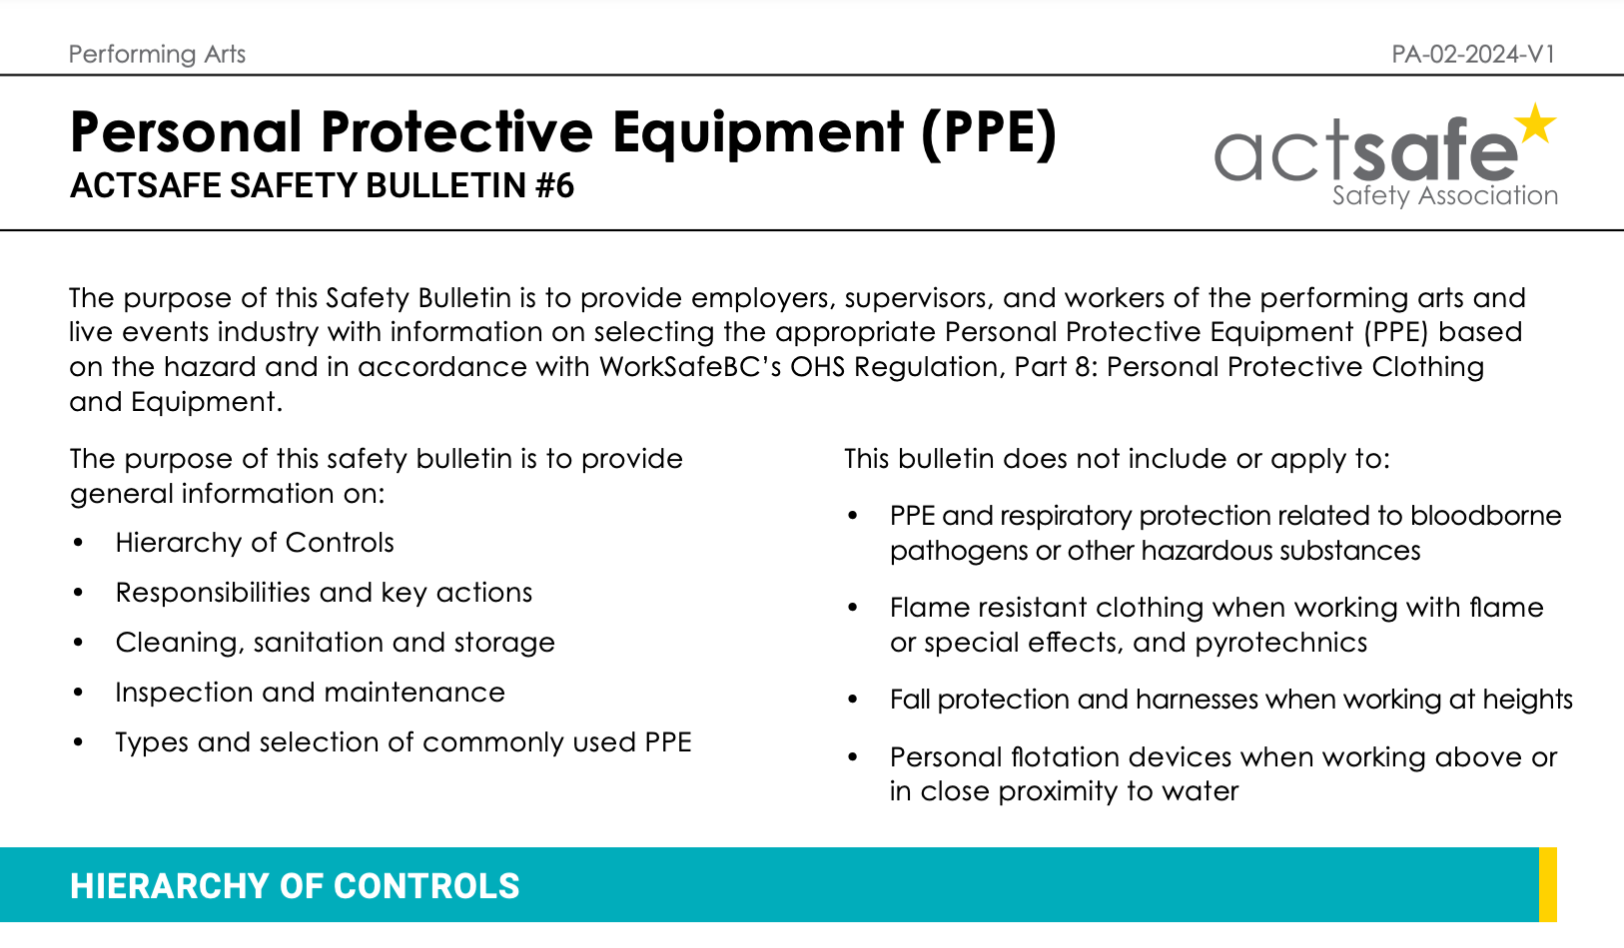 #6 Personal Protective Equipment (PPE) – Performing Arts